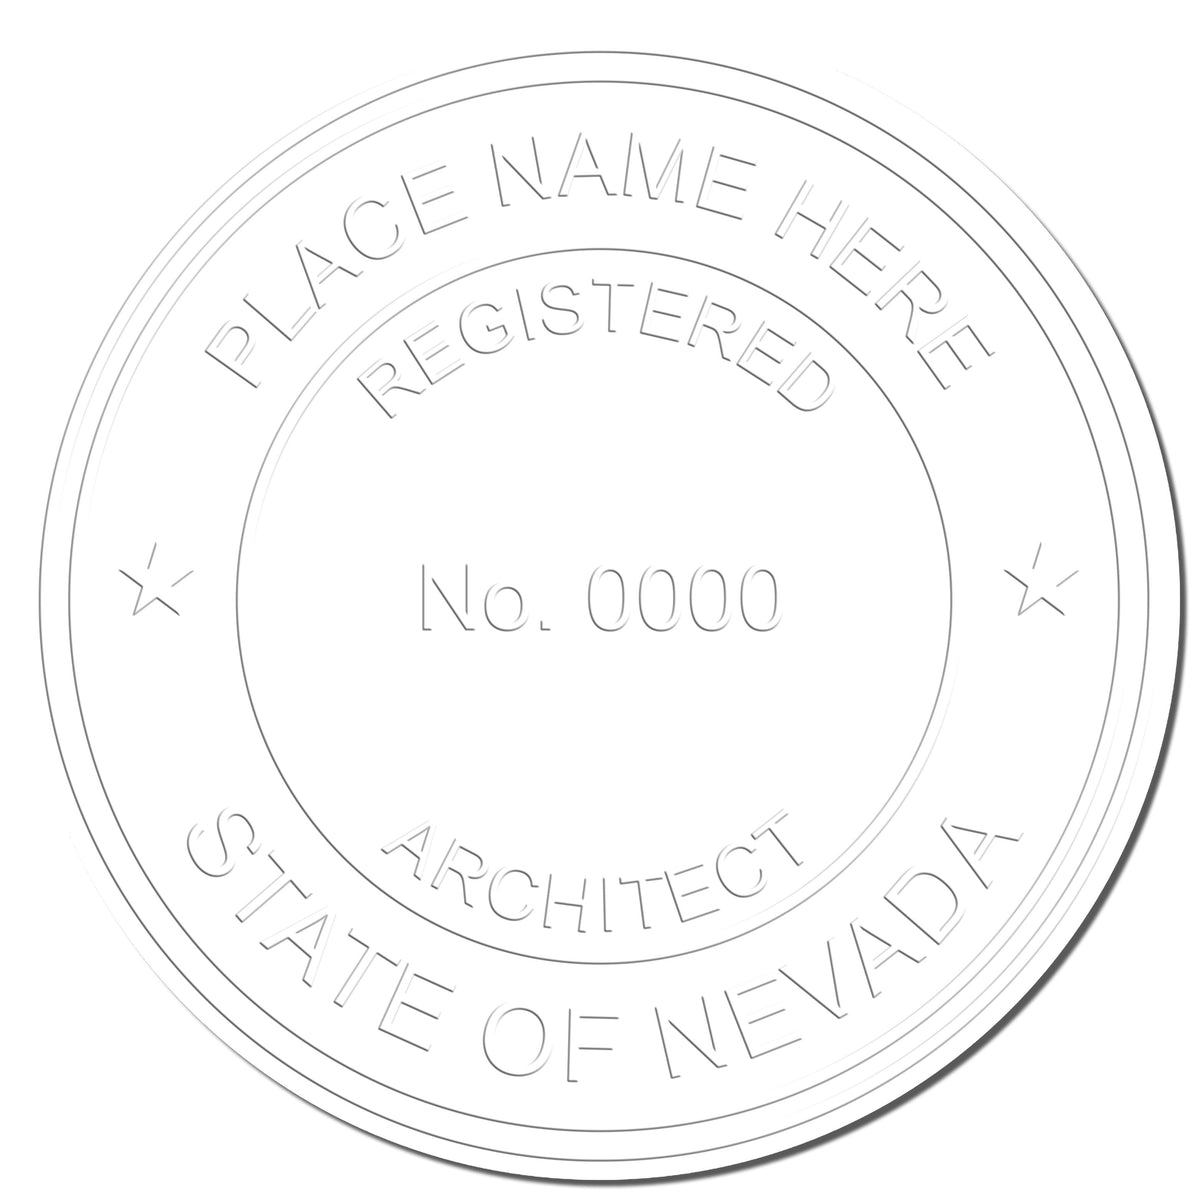 This paper is stamped with a sample imprint of the Hybrid Nevada Architect Seal, signifying its quality and reliability.